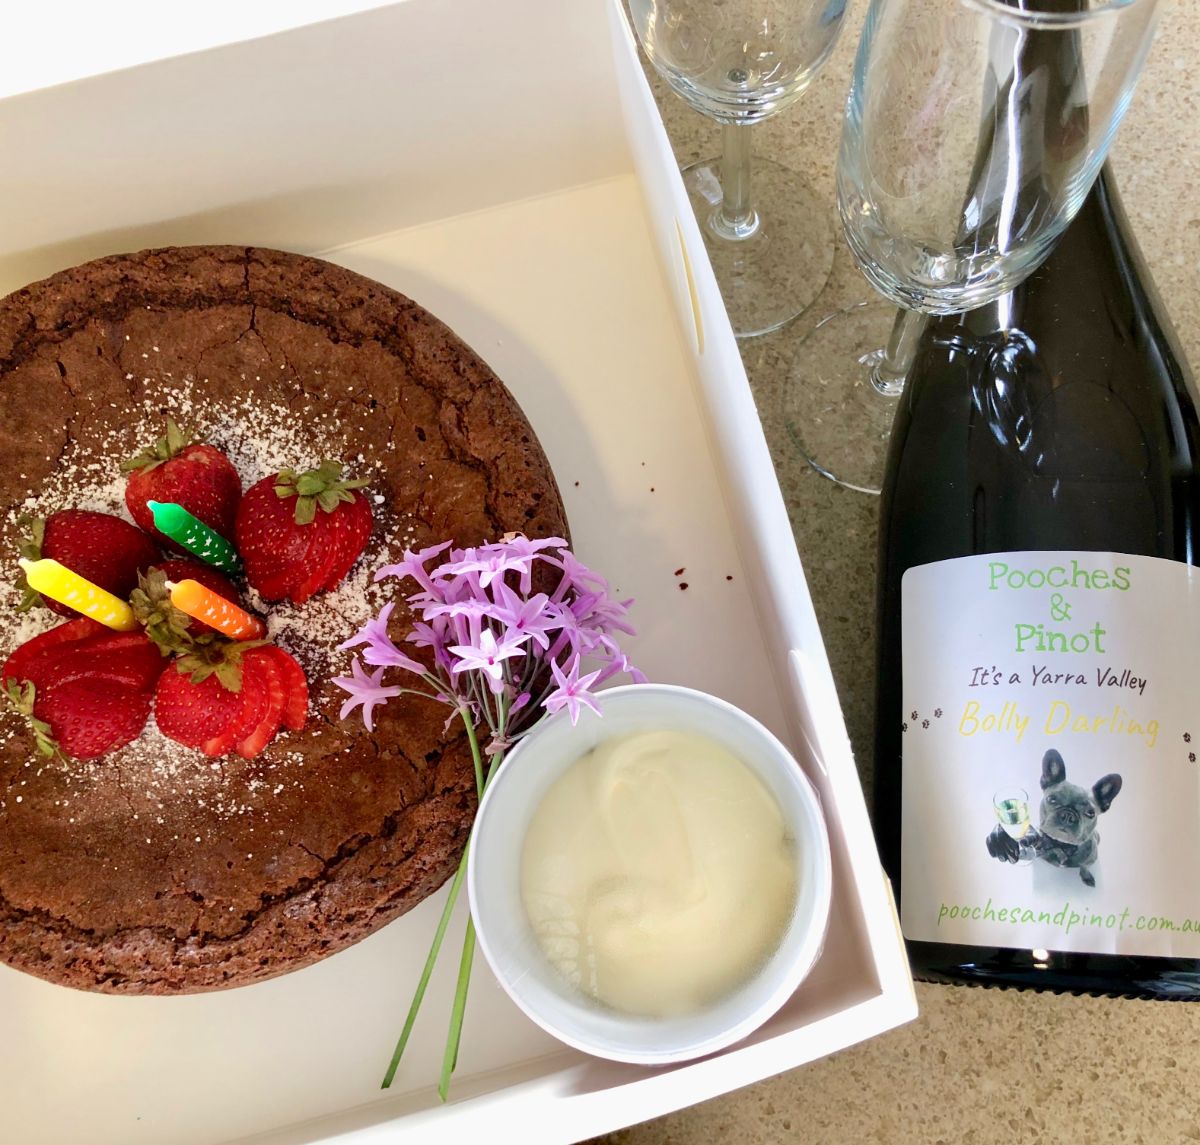 chef made cake on a pooches and pinot wine tour